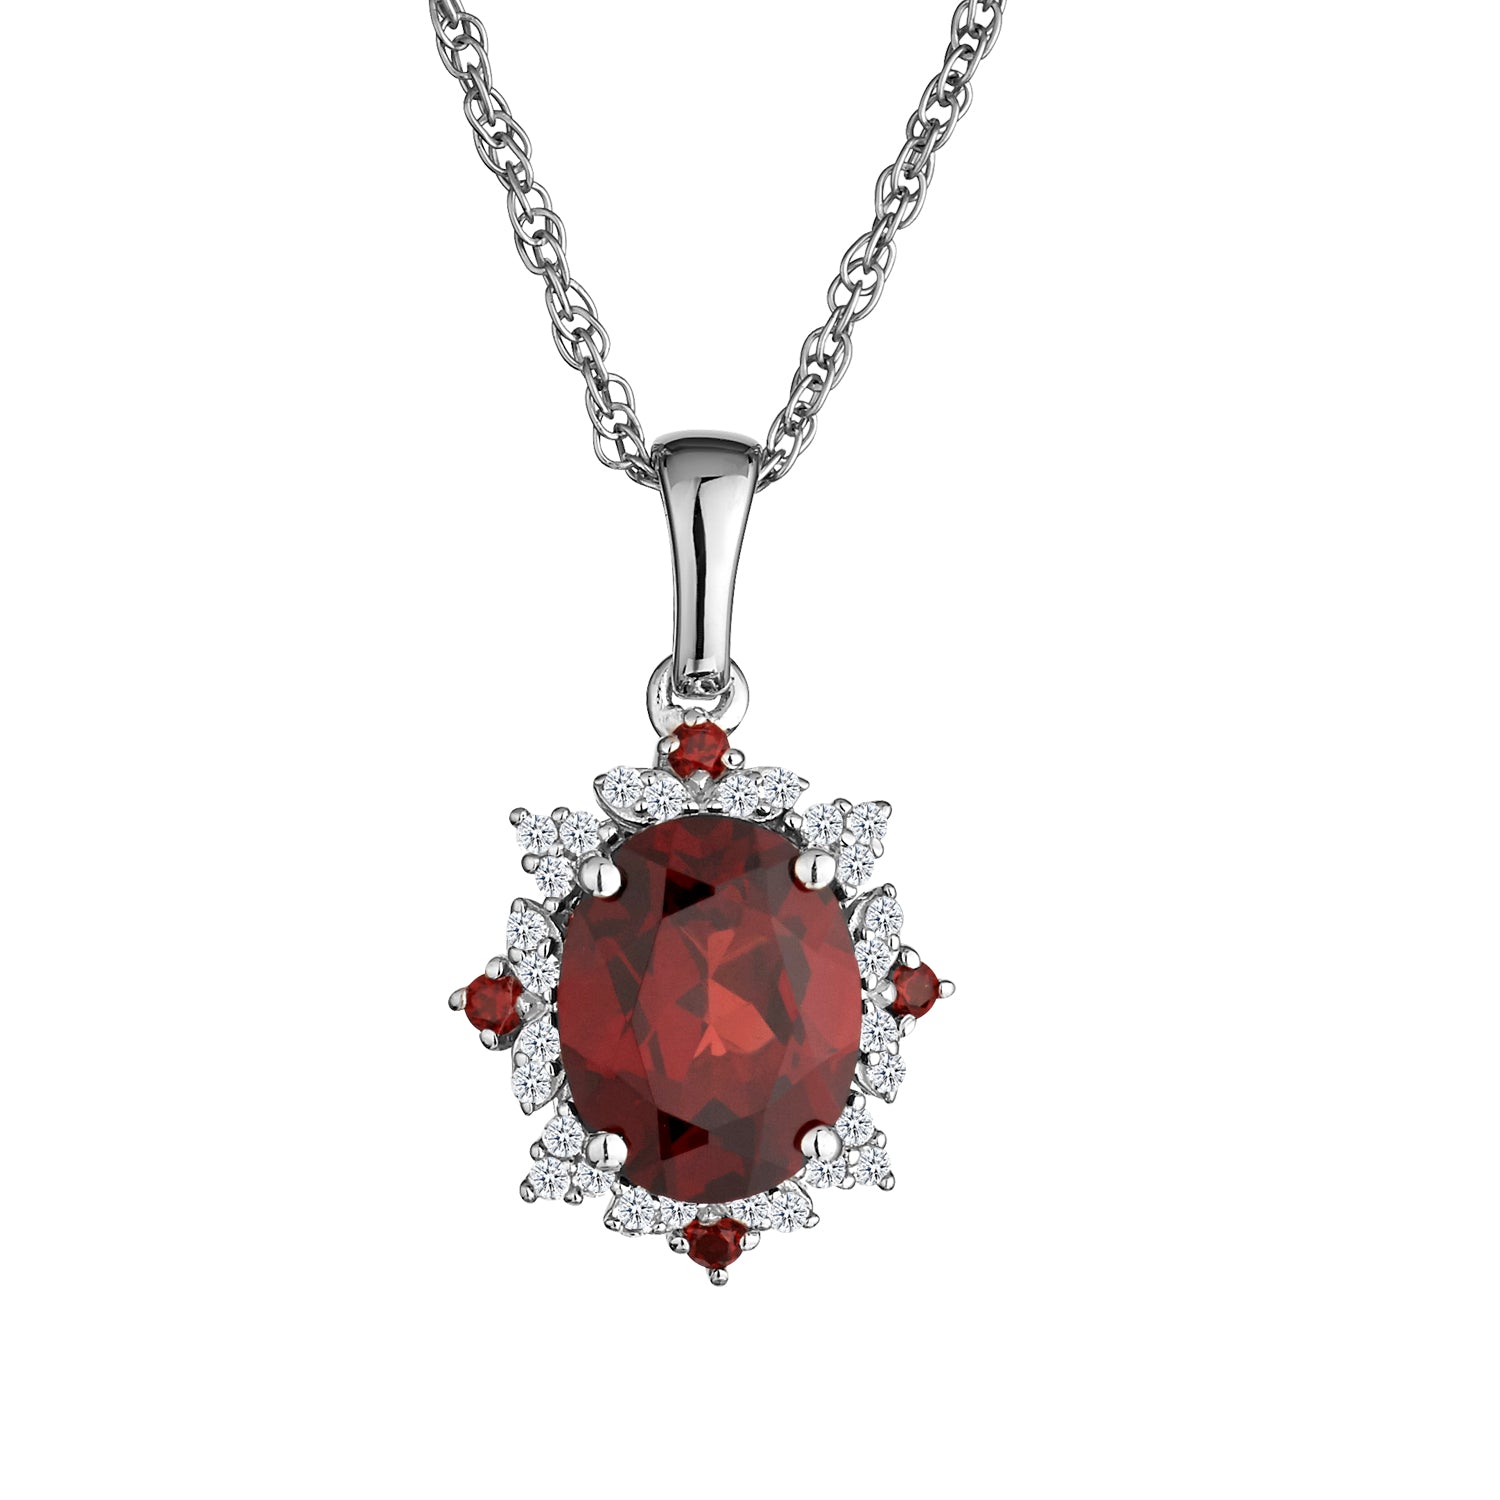 Garnet and Created White Sapphire Pendant,  Sterling Silver. Necklaces and Pendants. Griffin Jewellery Designs. 